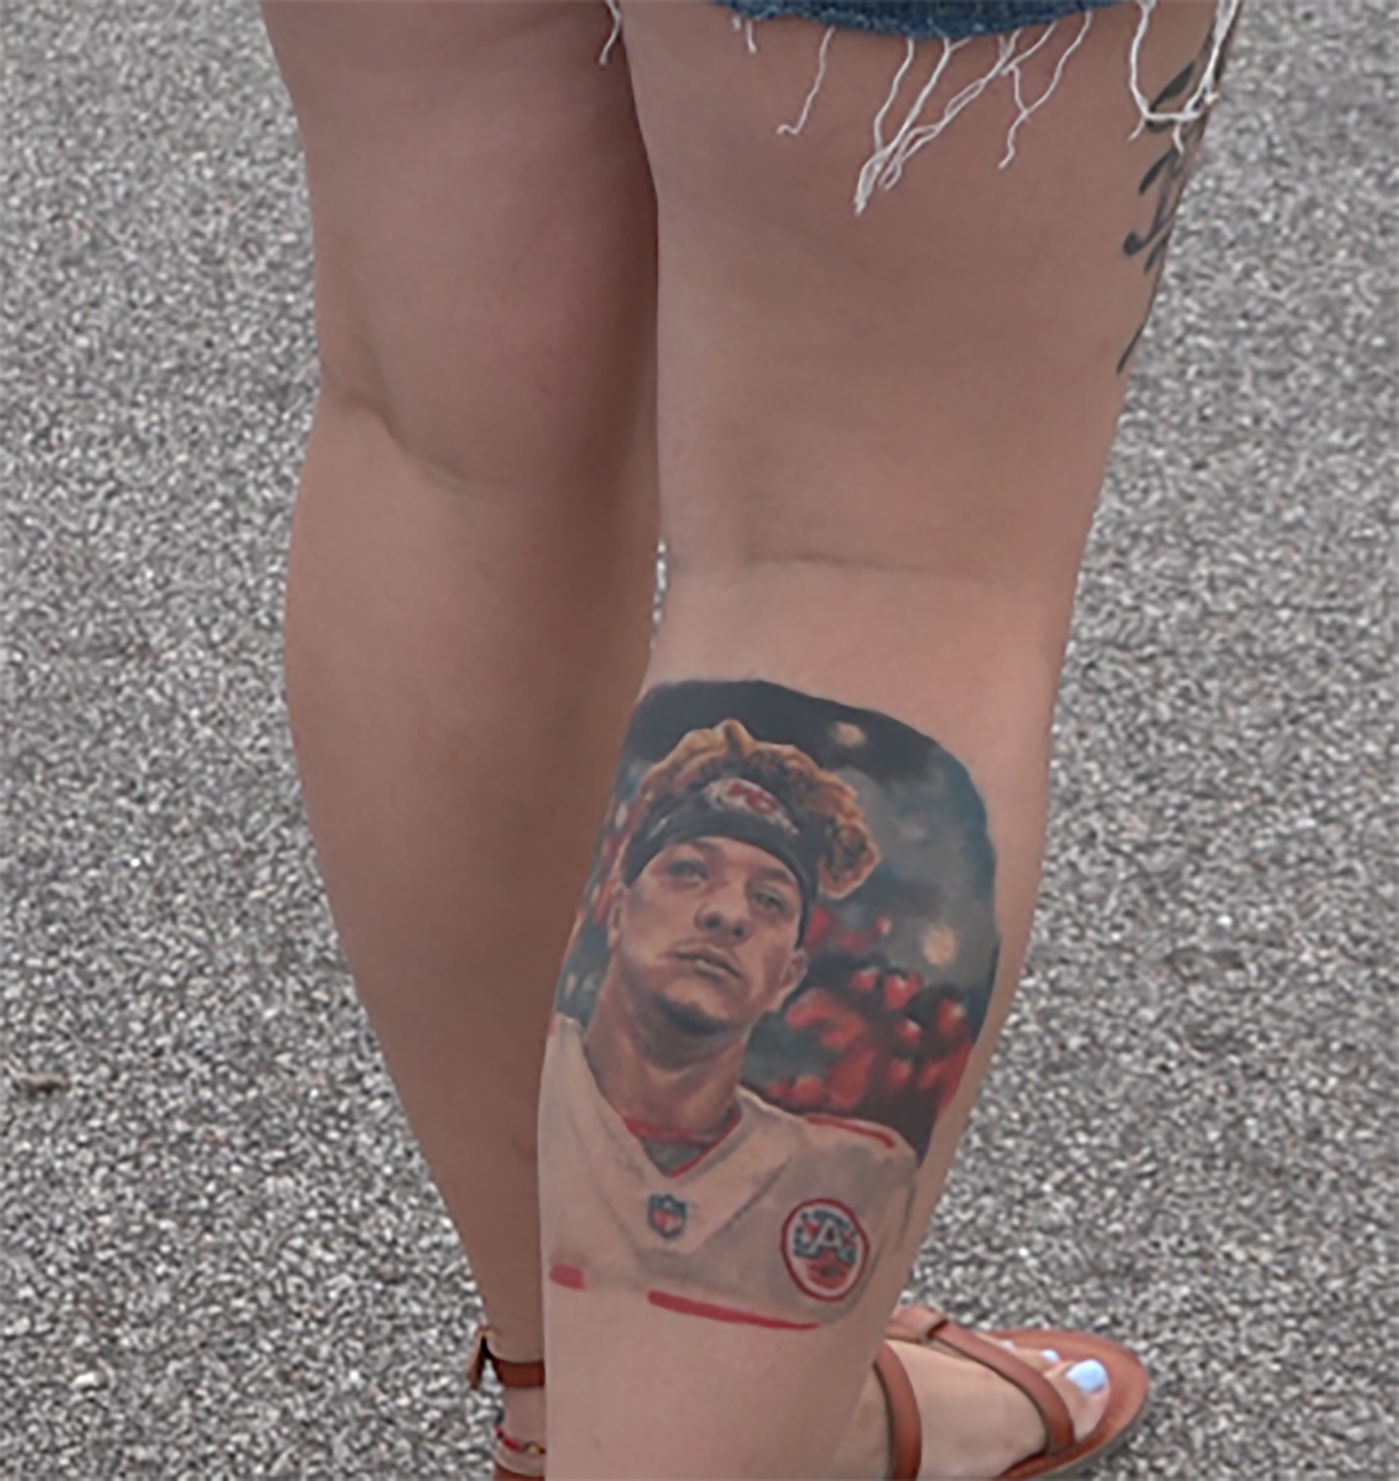 Patrick Mahomes new tattoo much different than Aaron Rodgers first